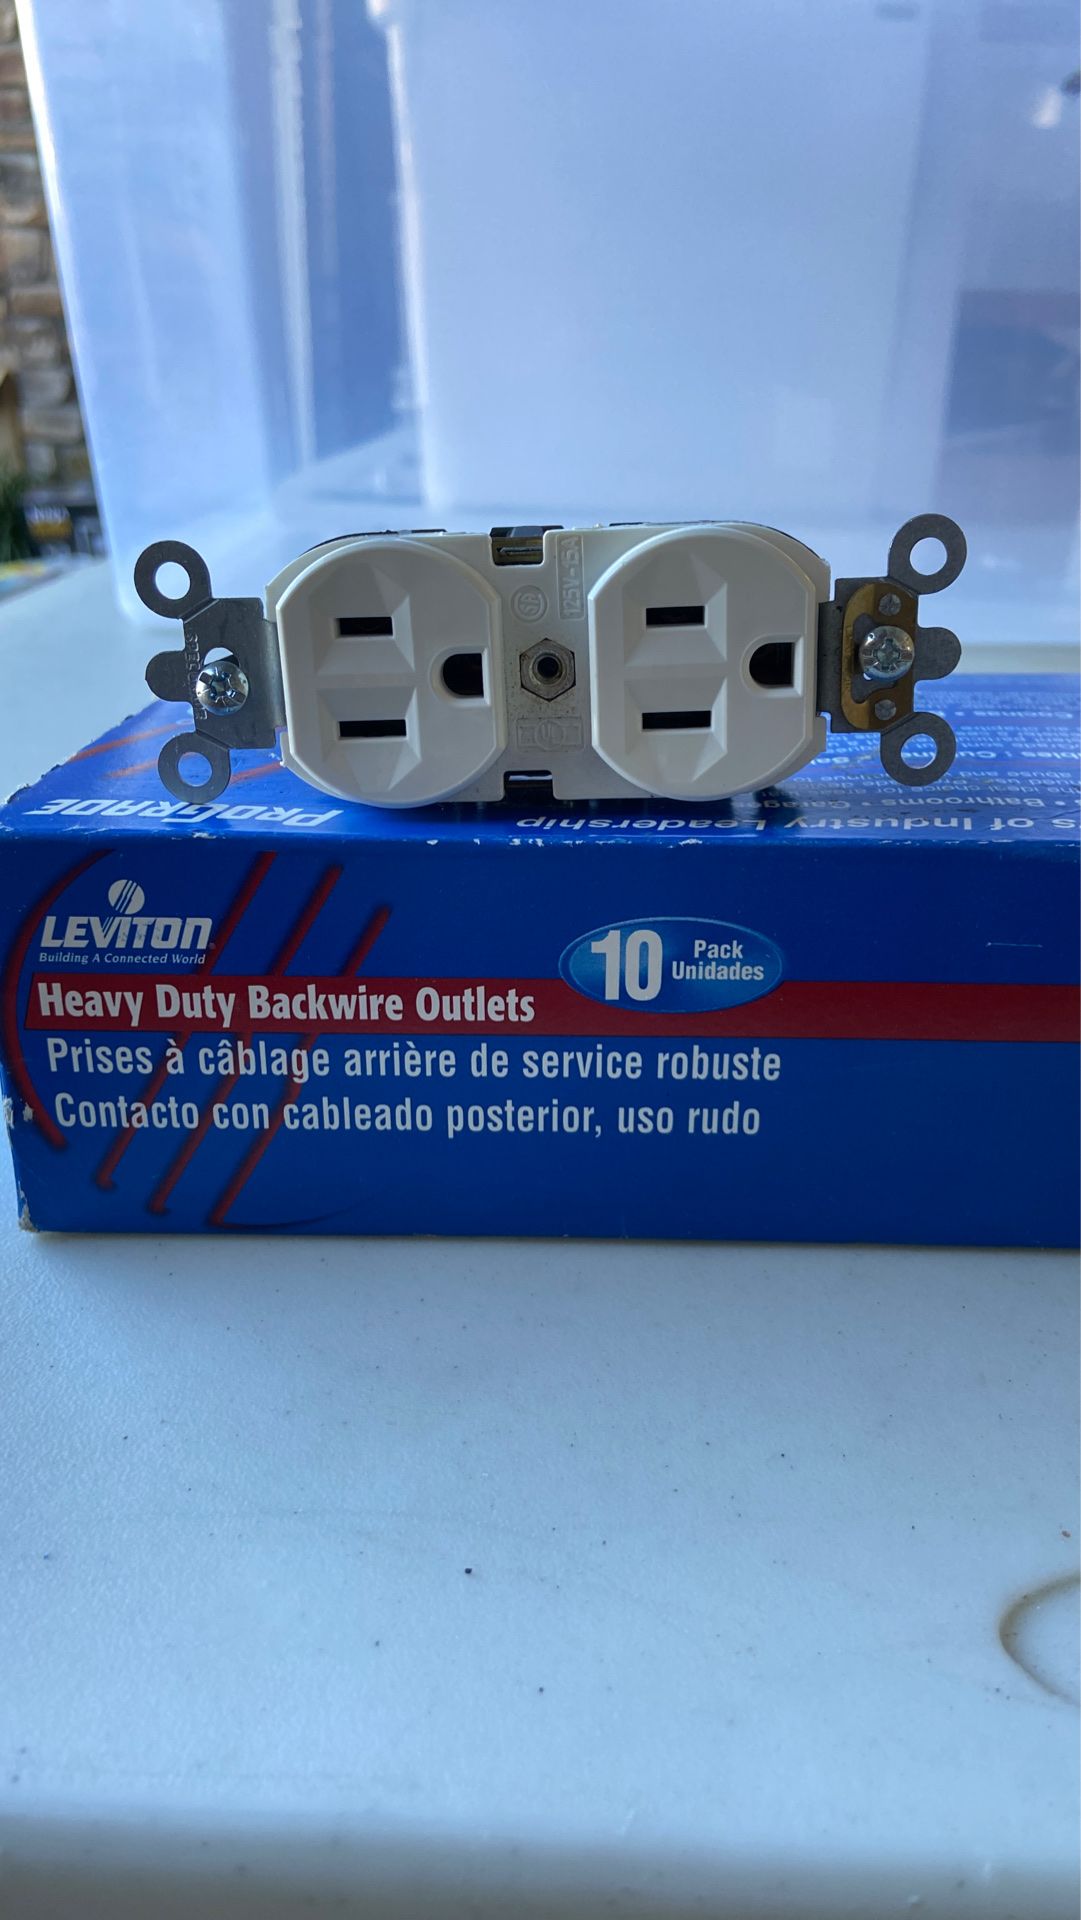 Backwire Outlets